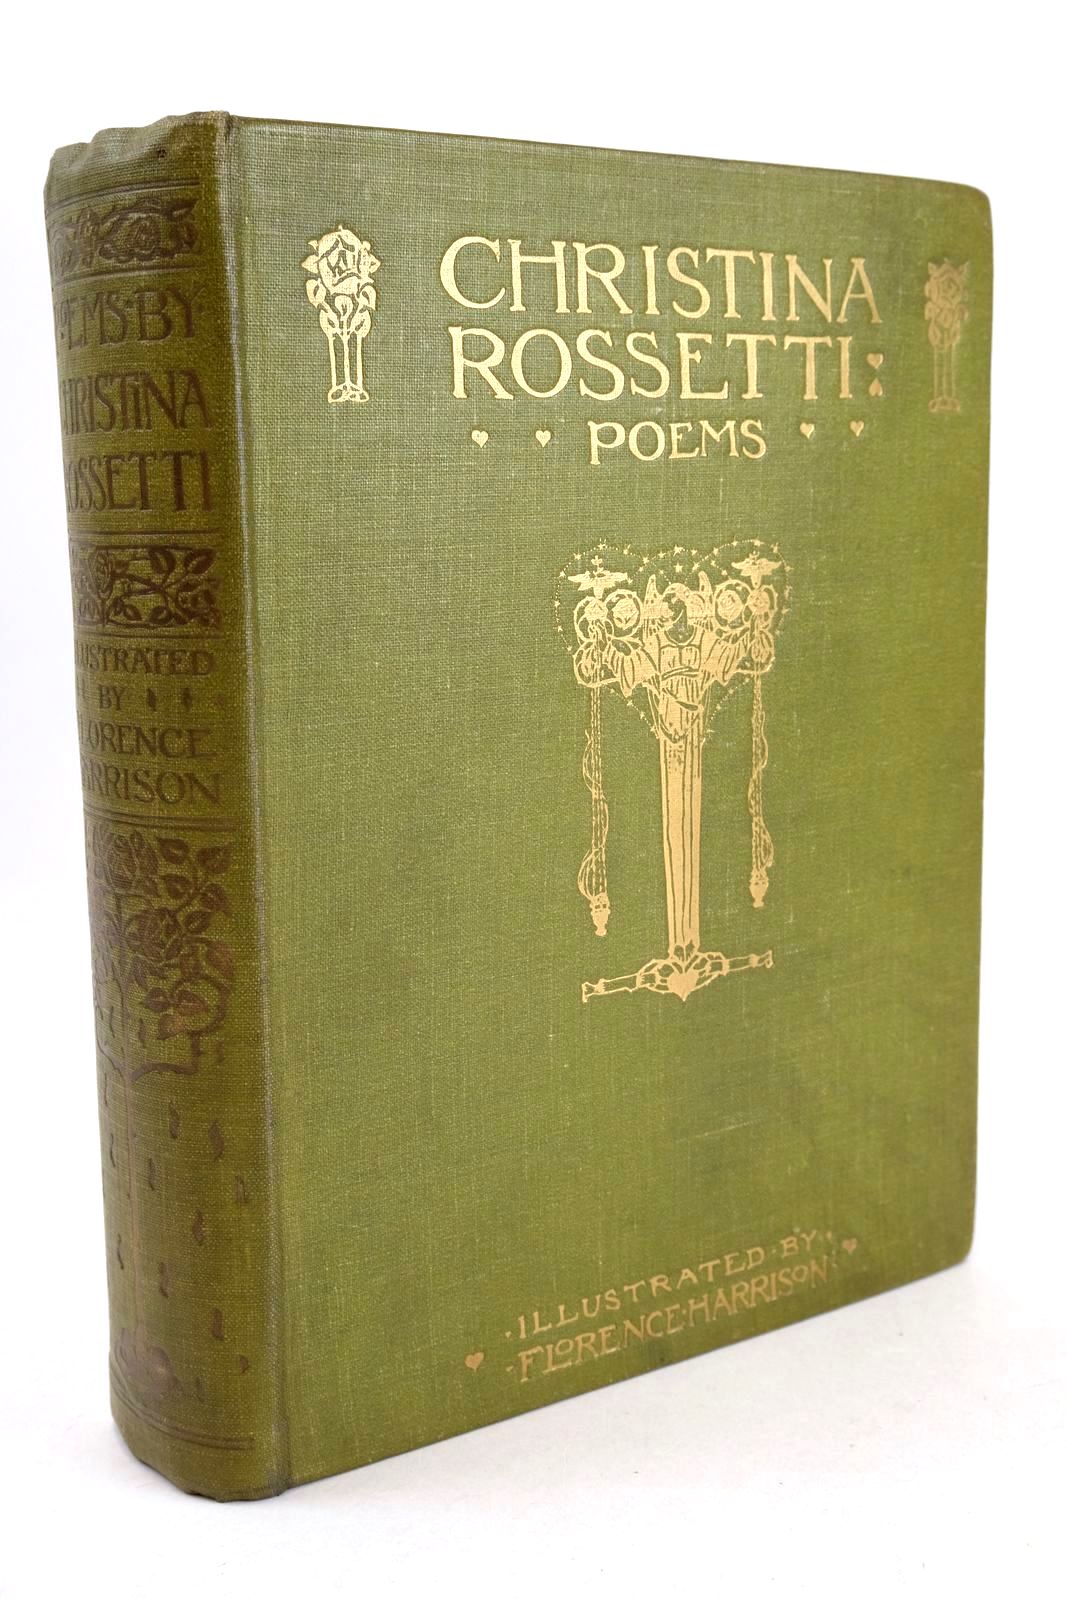 Photo of POEMS BY CHRISTINA ROSSETTI- Stock Number: 1326350